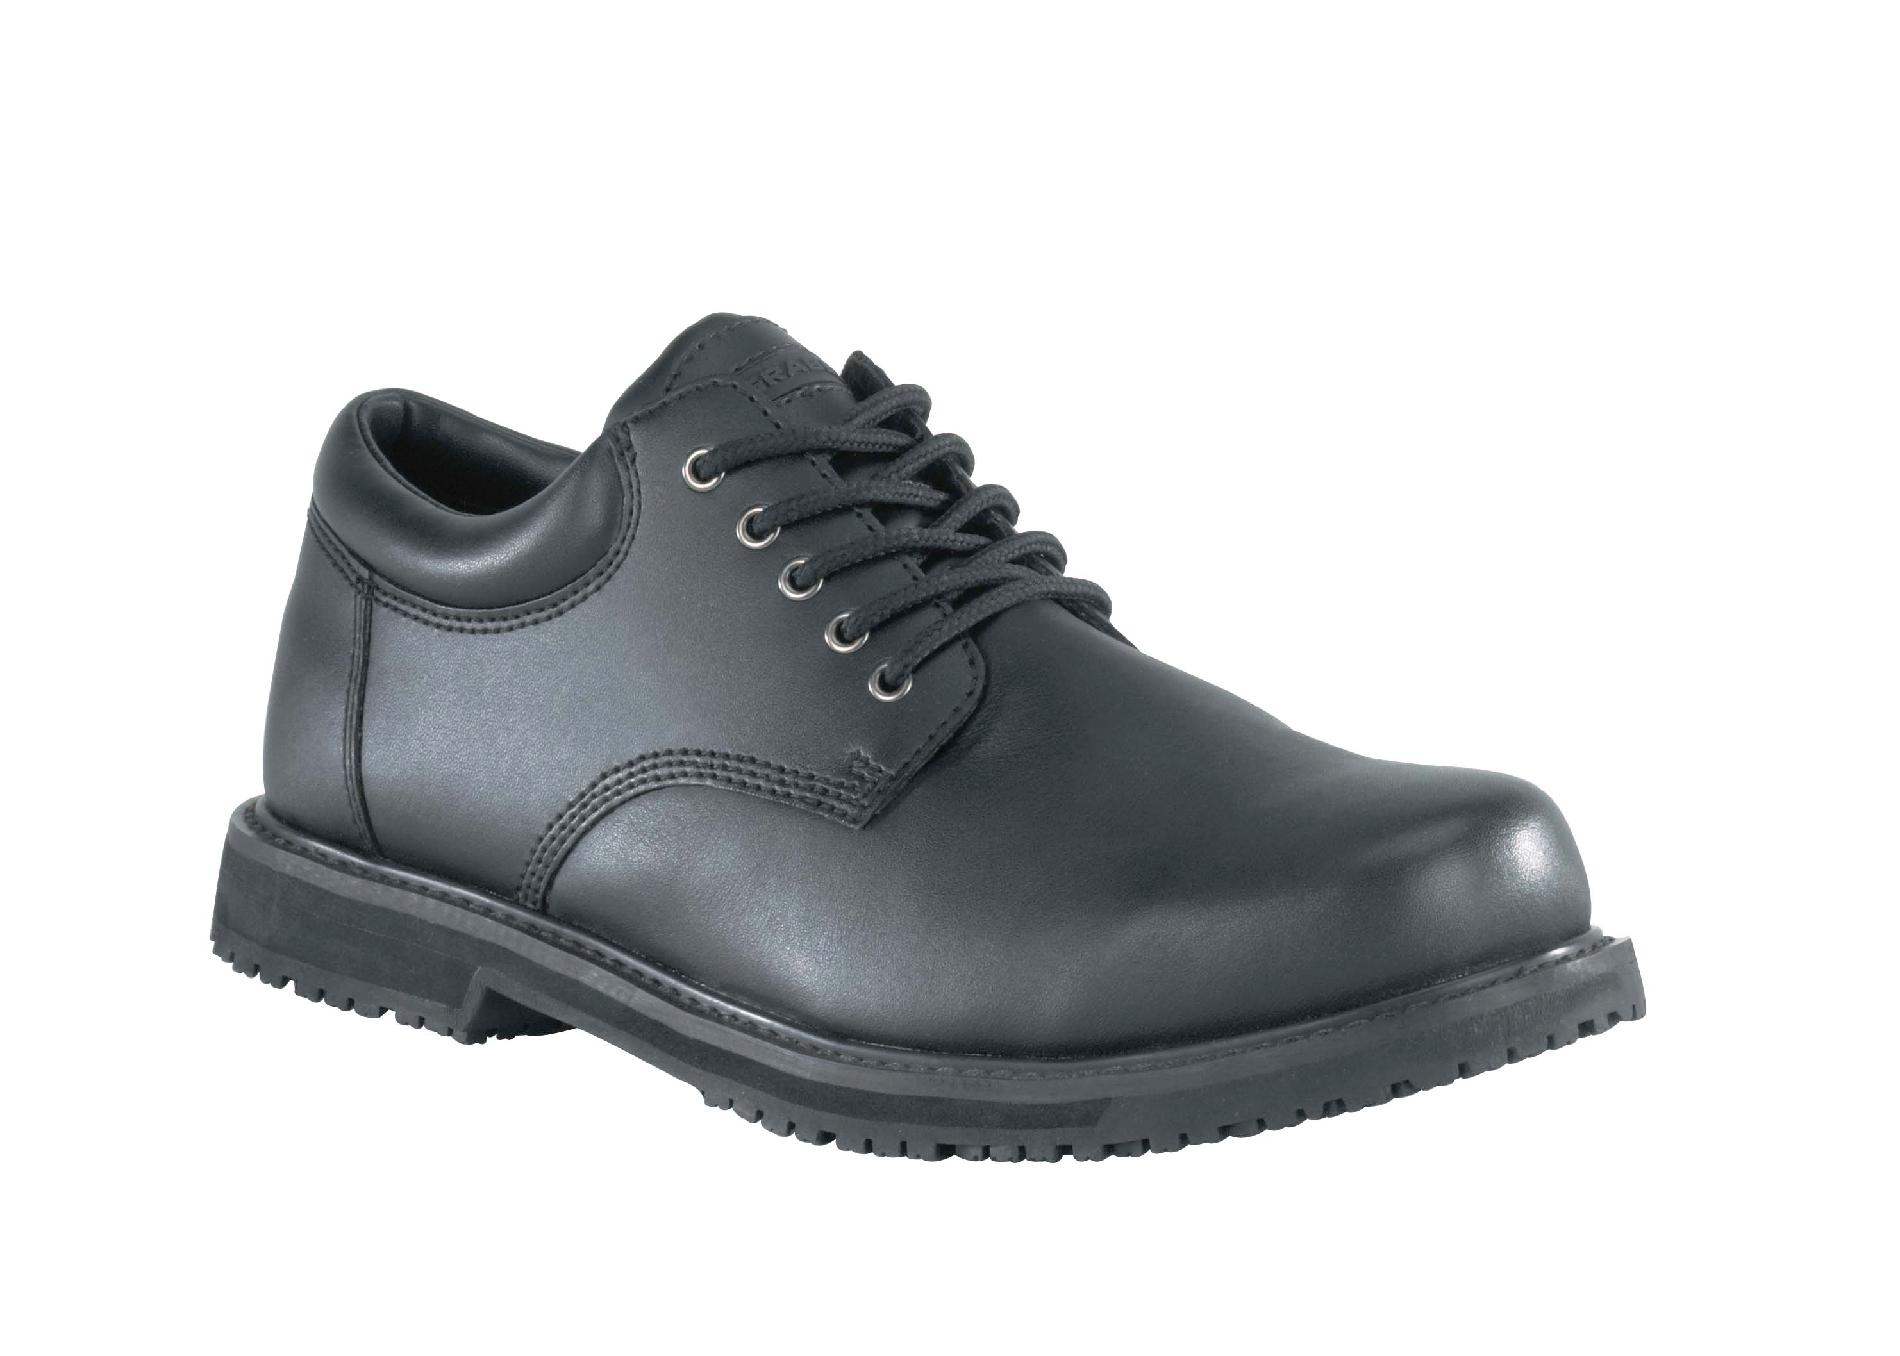 Grabbers Men's Friction #G1120 Slip Resistant Oxford Wide Width Available - Black